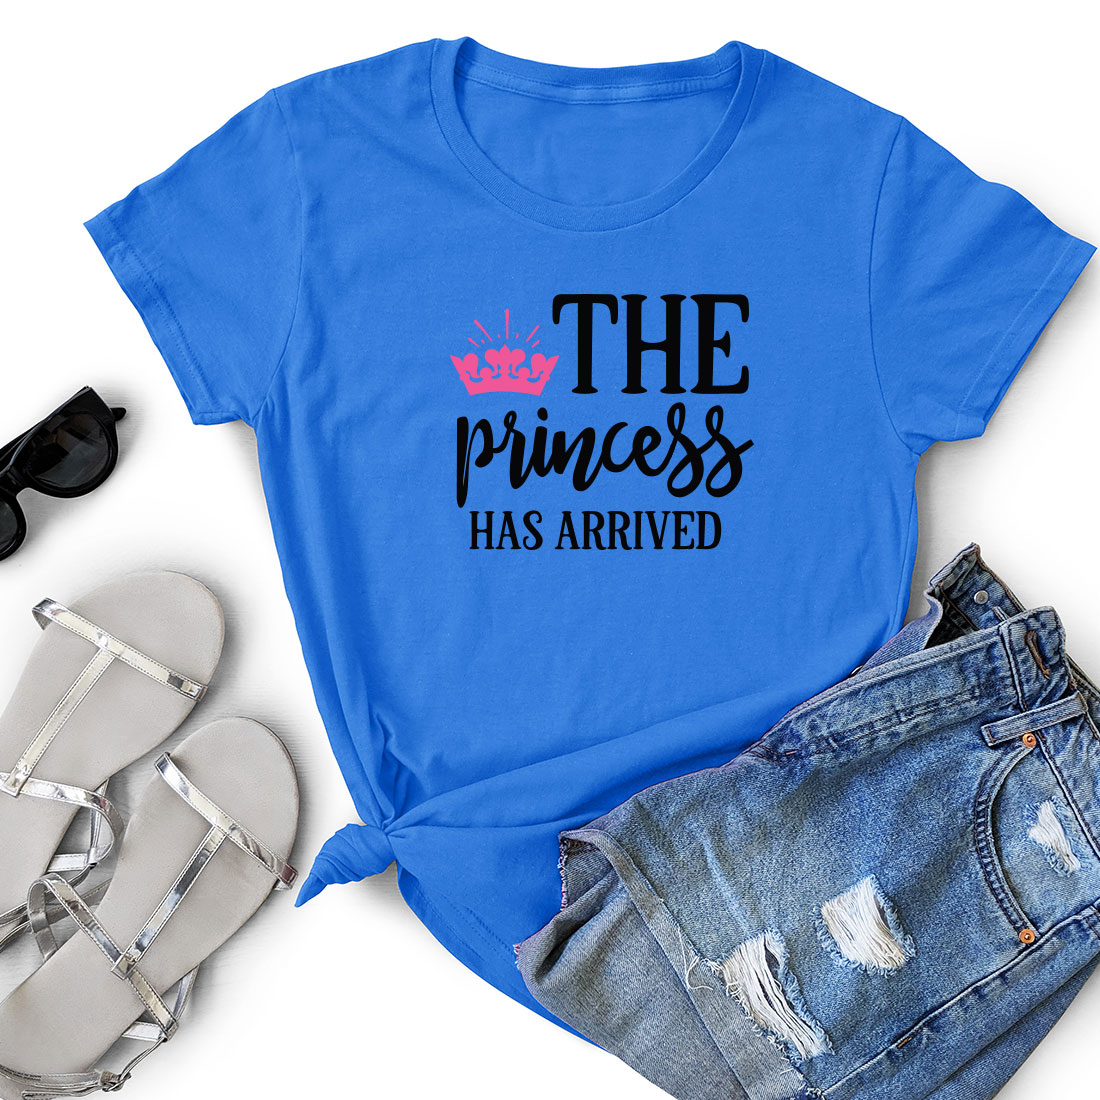 T - shirt that says the princess has arrived next to a pair of shorts.